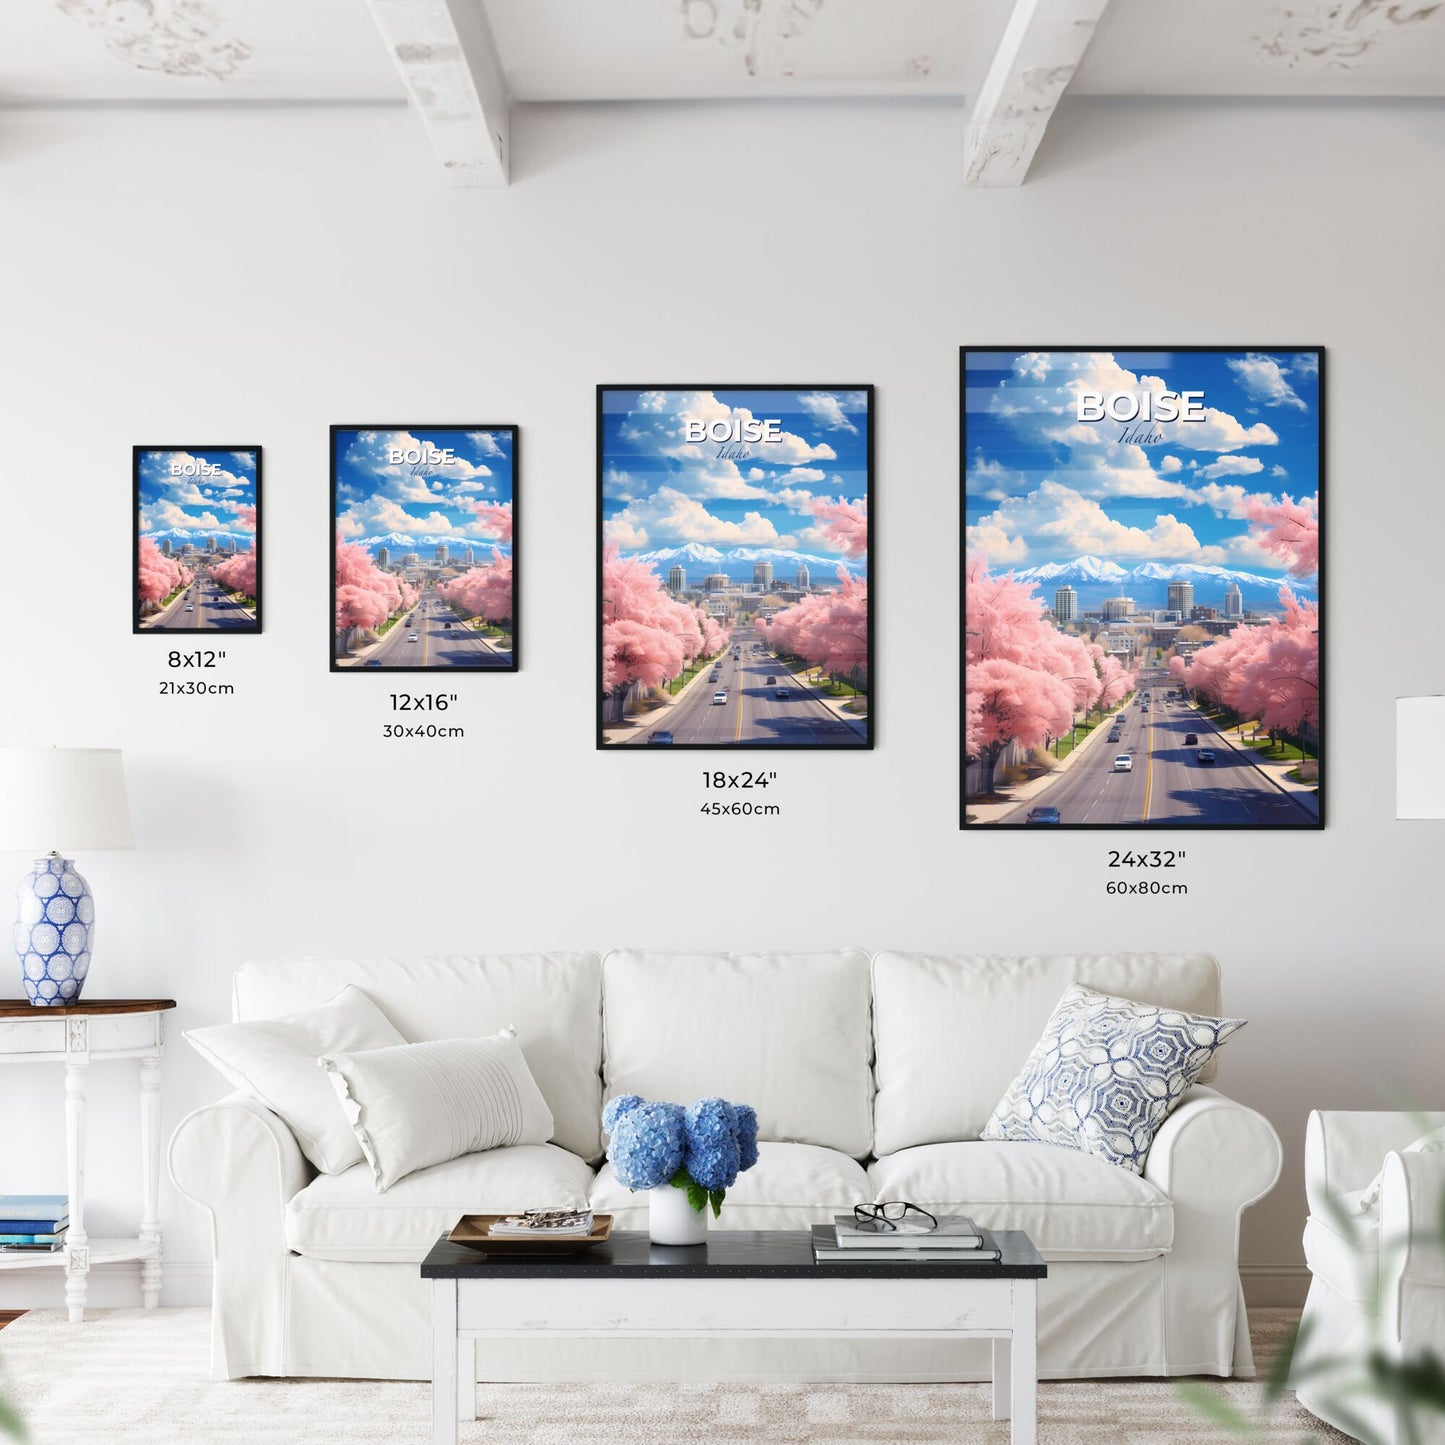 Boise Idaho Skyline - A Road With Pink Trees And Buildings In The Background - Customizable Travel Gift Default Title